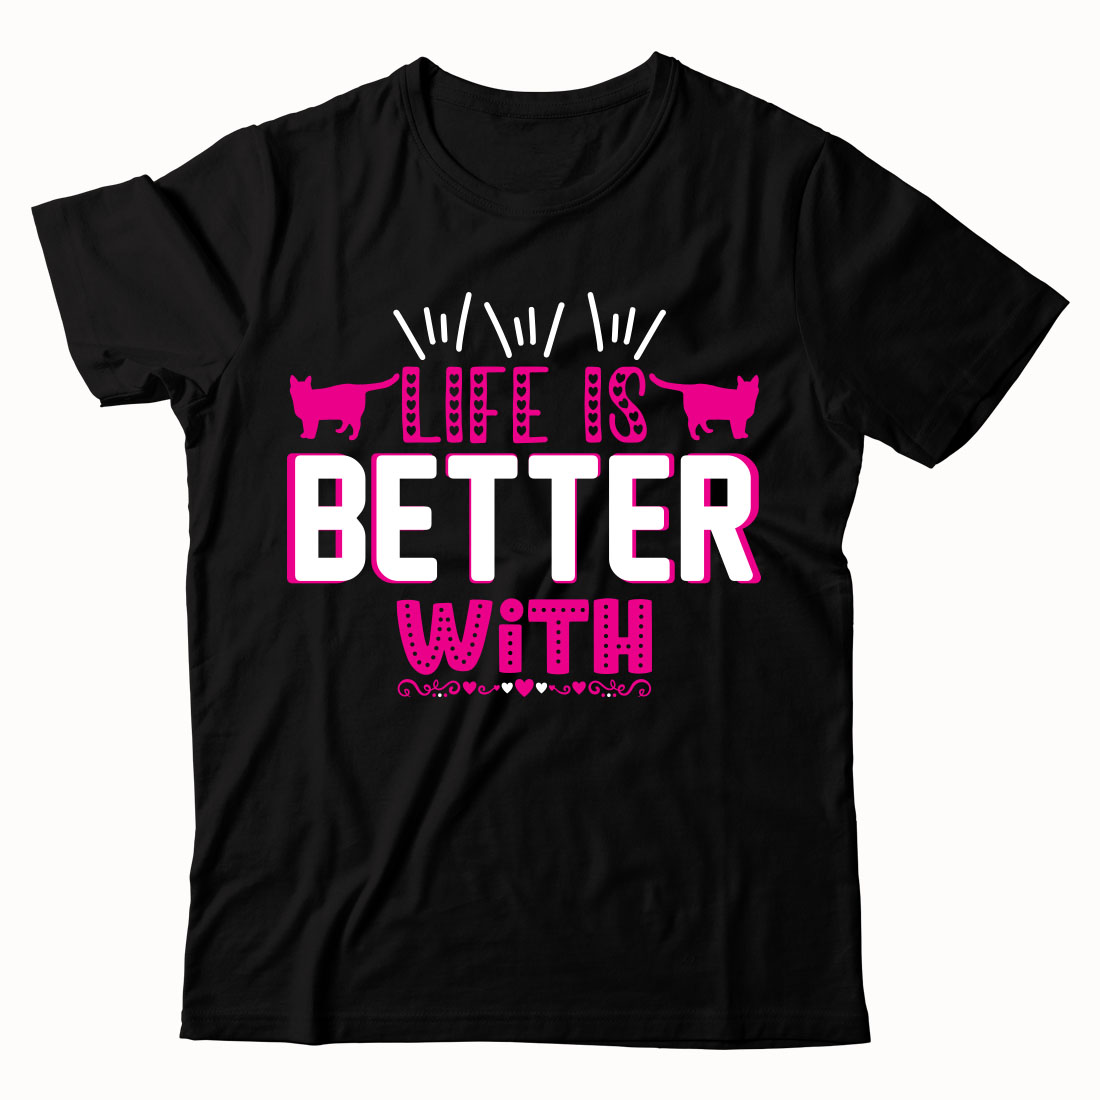 Black t - shirt with pink lettering that says hello is better with cows.